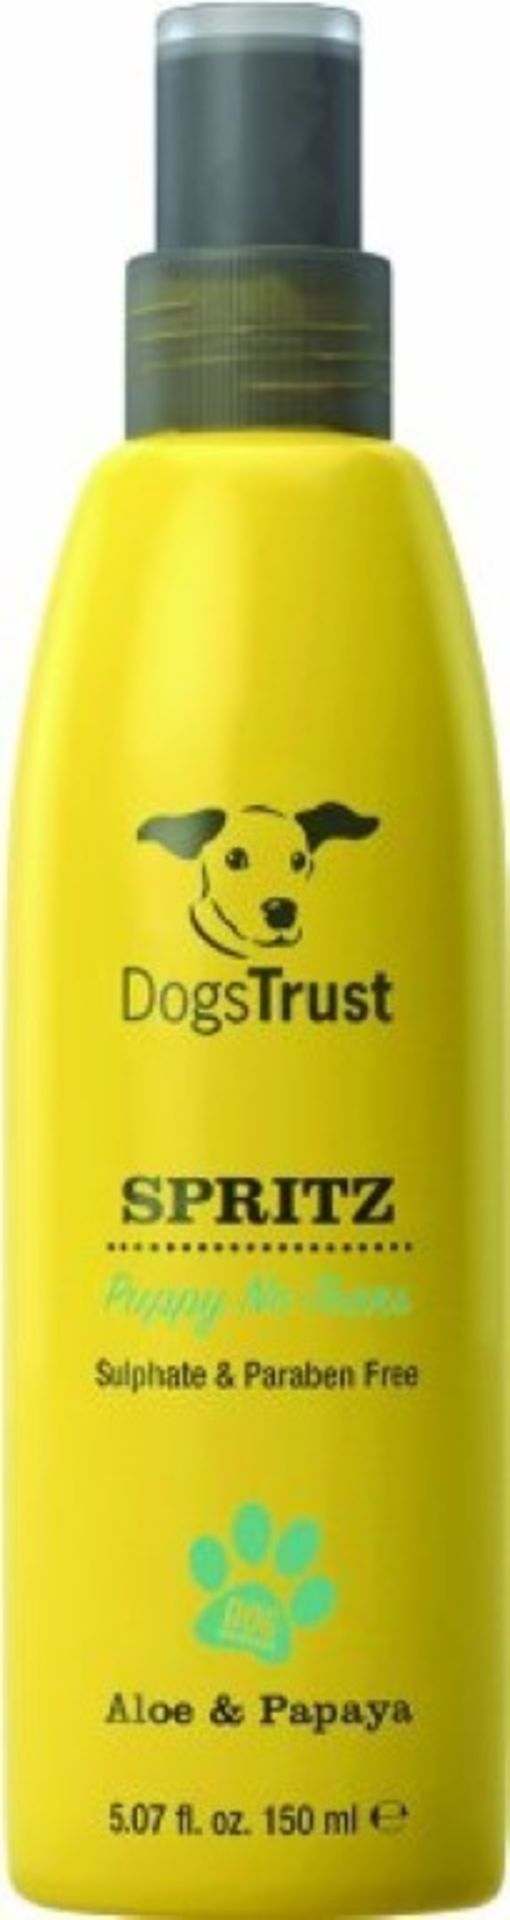 60 x Various Dogs Trust Shampoos and Conditioners - Brand New Stock - CL028 - Includes No Tears, - Image 15 of 15